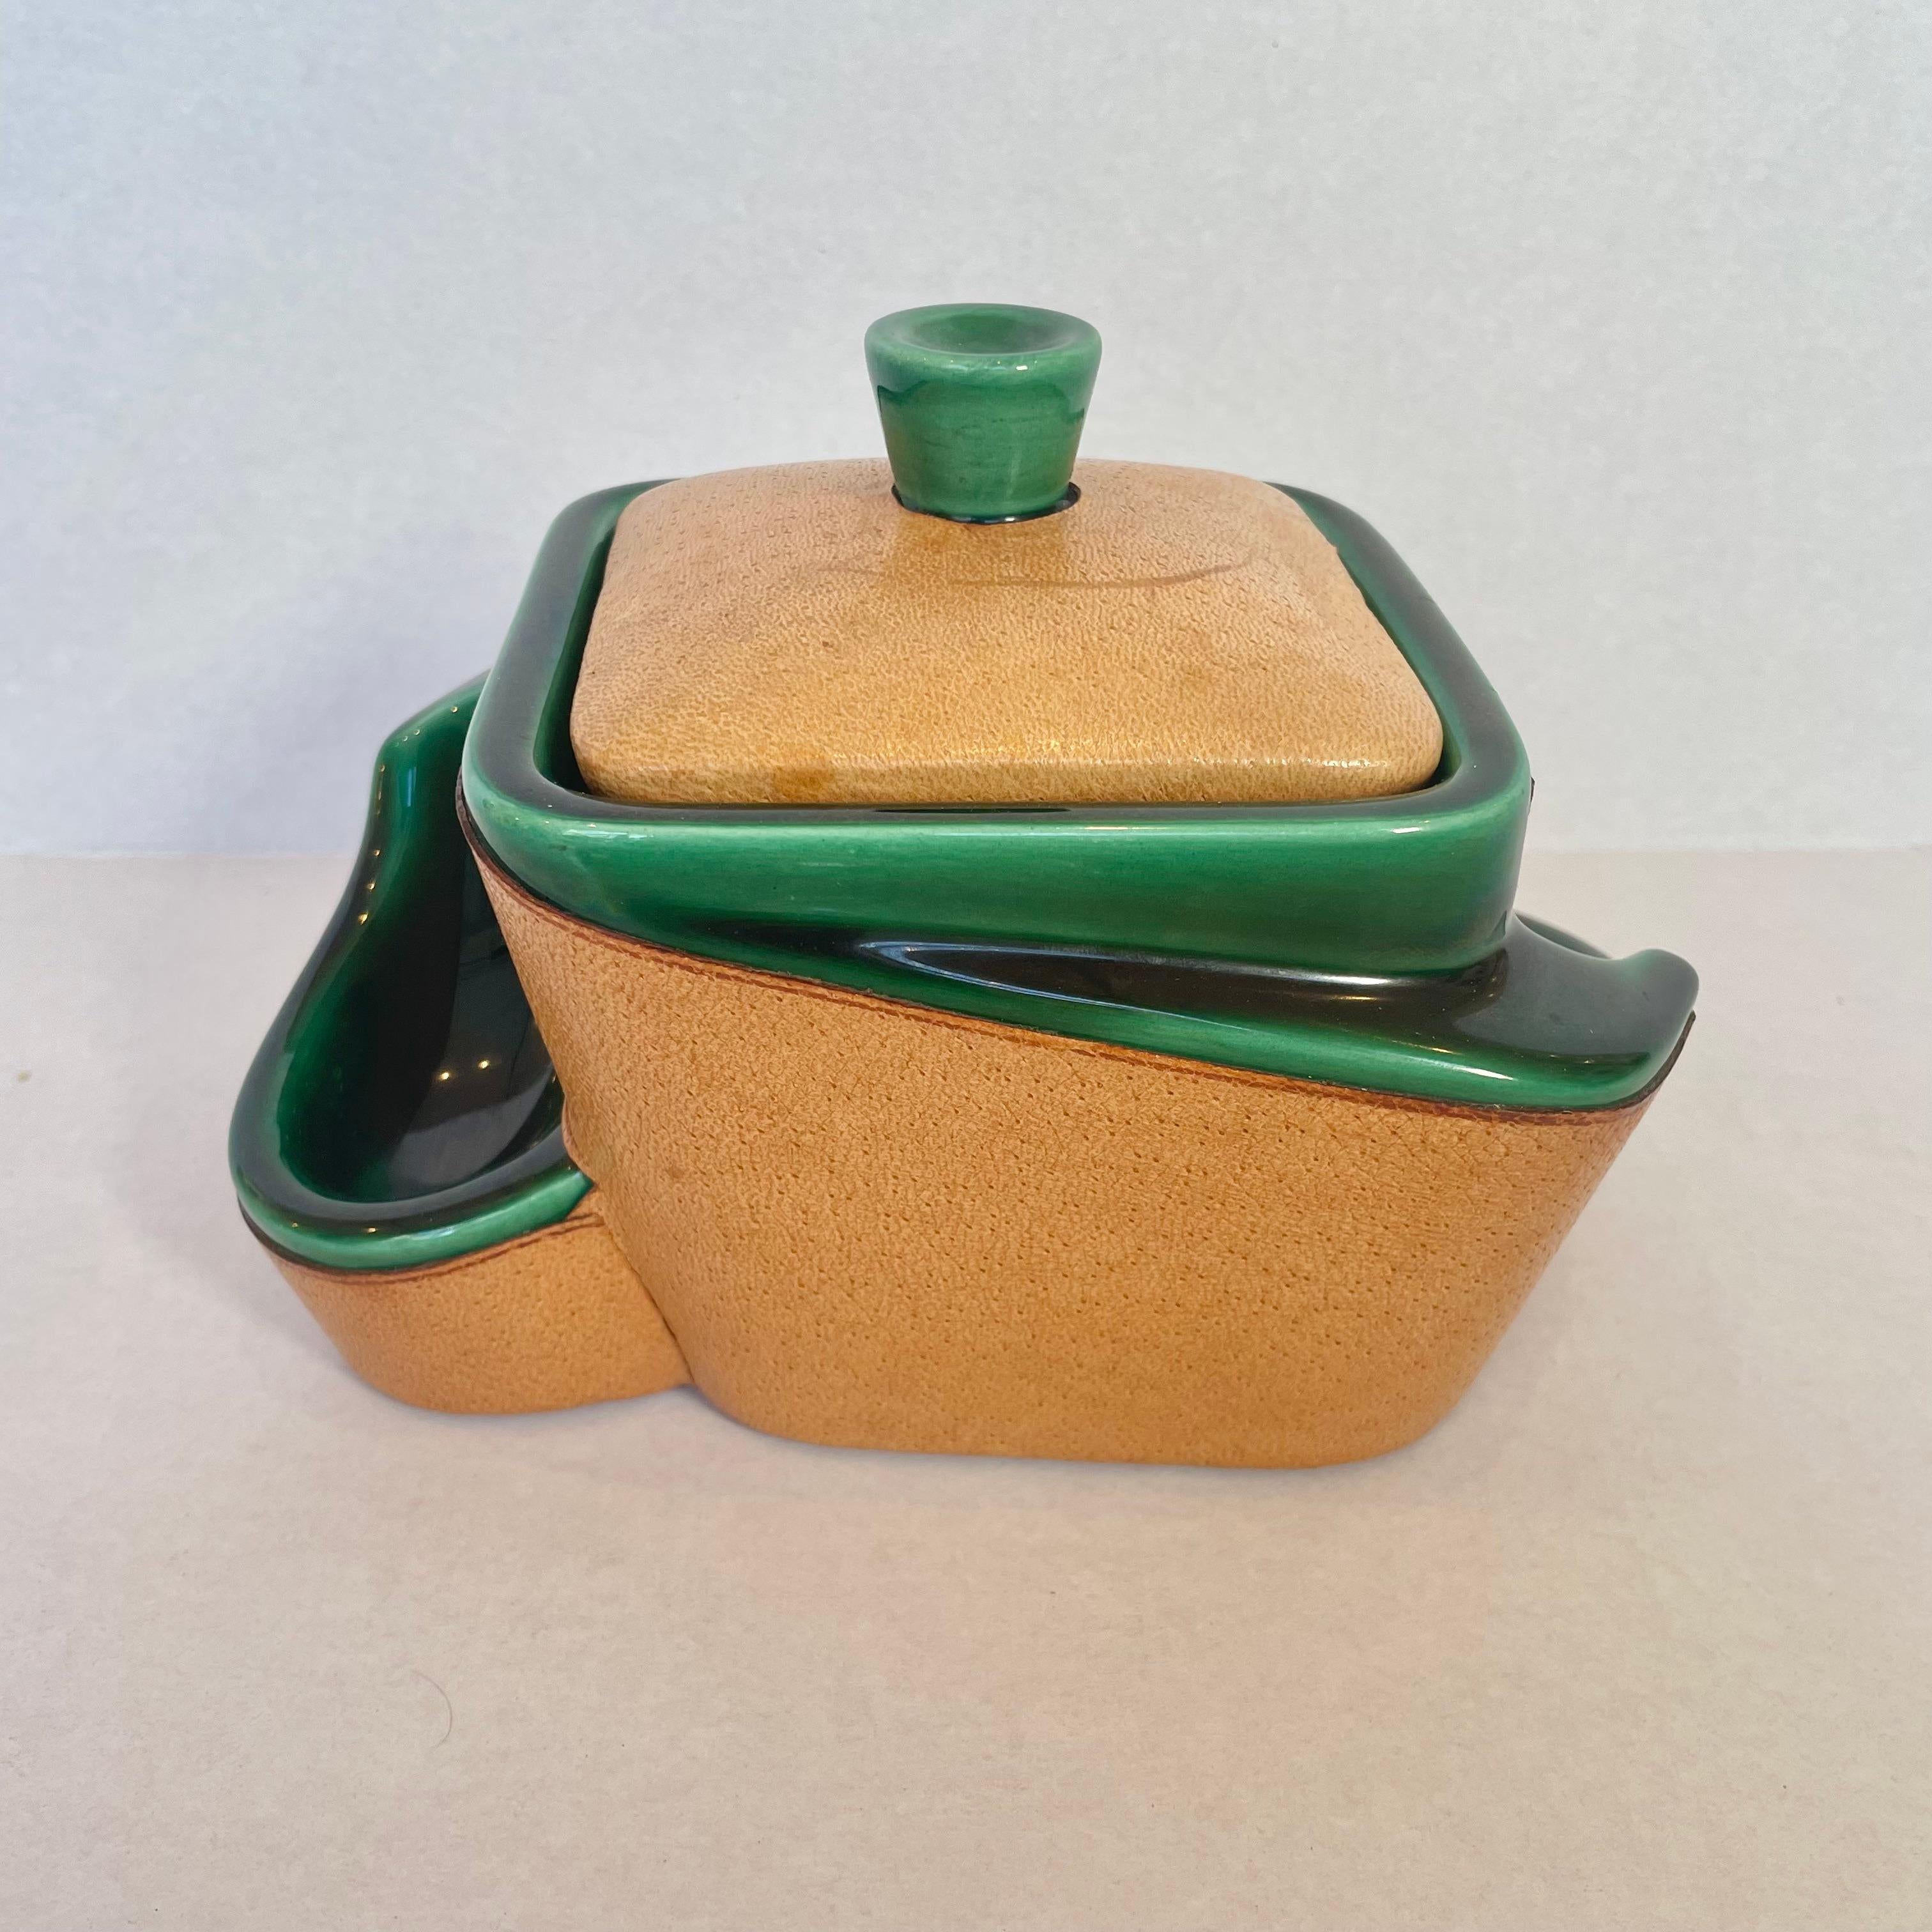 Handsome leather and ceramic tobacco/weed jar and pipe holder. Beautiful green ceramic and perfect patina to tan leather with a felted base. Opens up to reveal the stash jar while the sides are shaped to hold pipes or ashes from cigarettes. Great